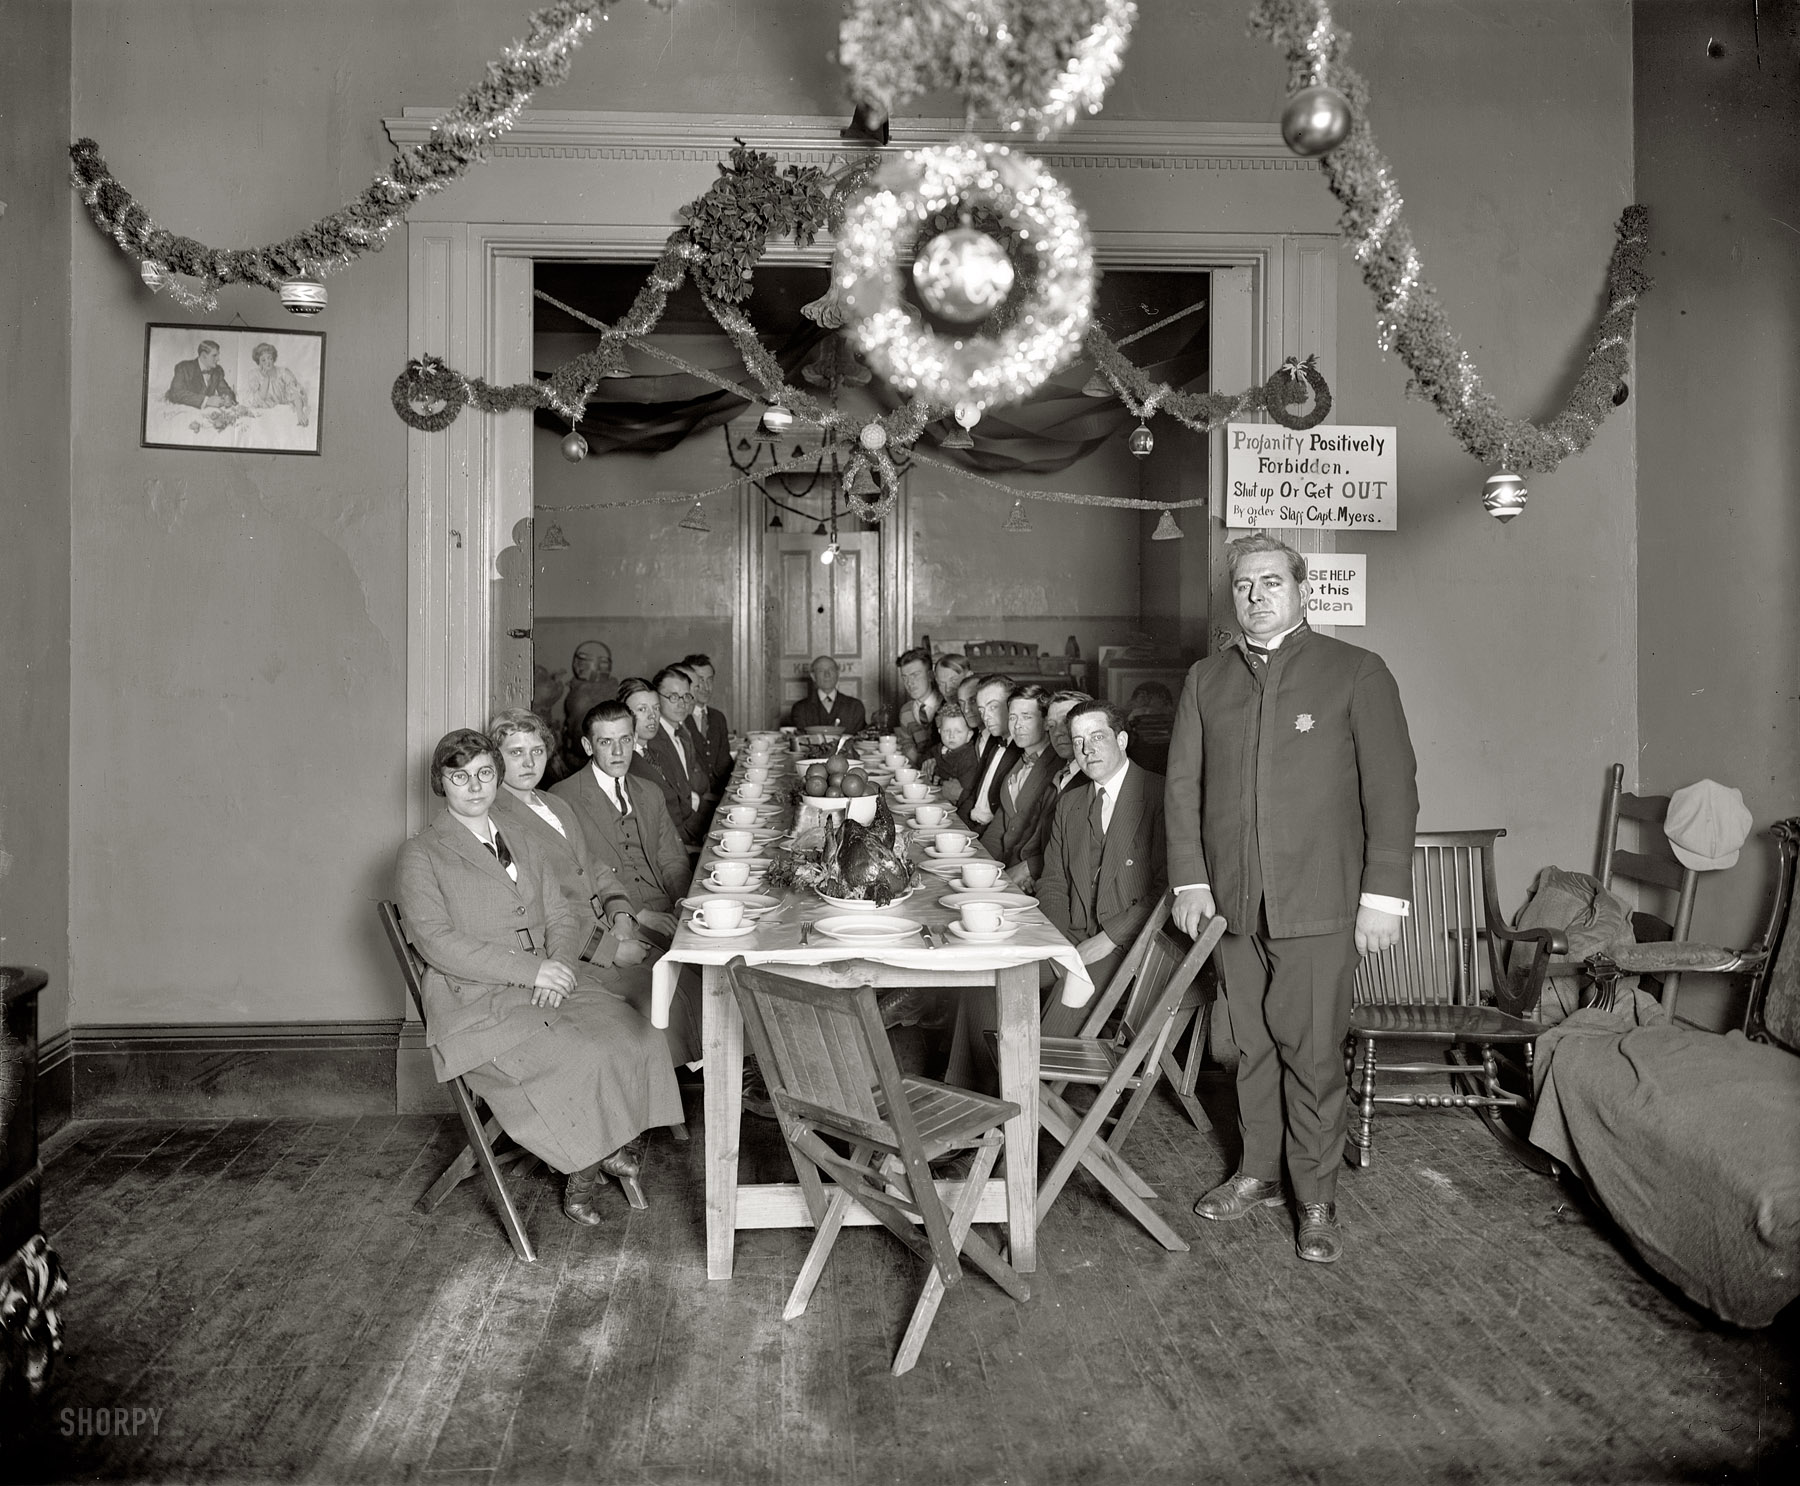 "Volunteers of America, Christmas 1925." A festive table, good friends and that venerable yuletide sentiment "Profanity Positively Forbidden -- Shut Up or Get OUT." Merry Christmas! National Photo Co. glass negative. View full size.